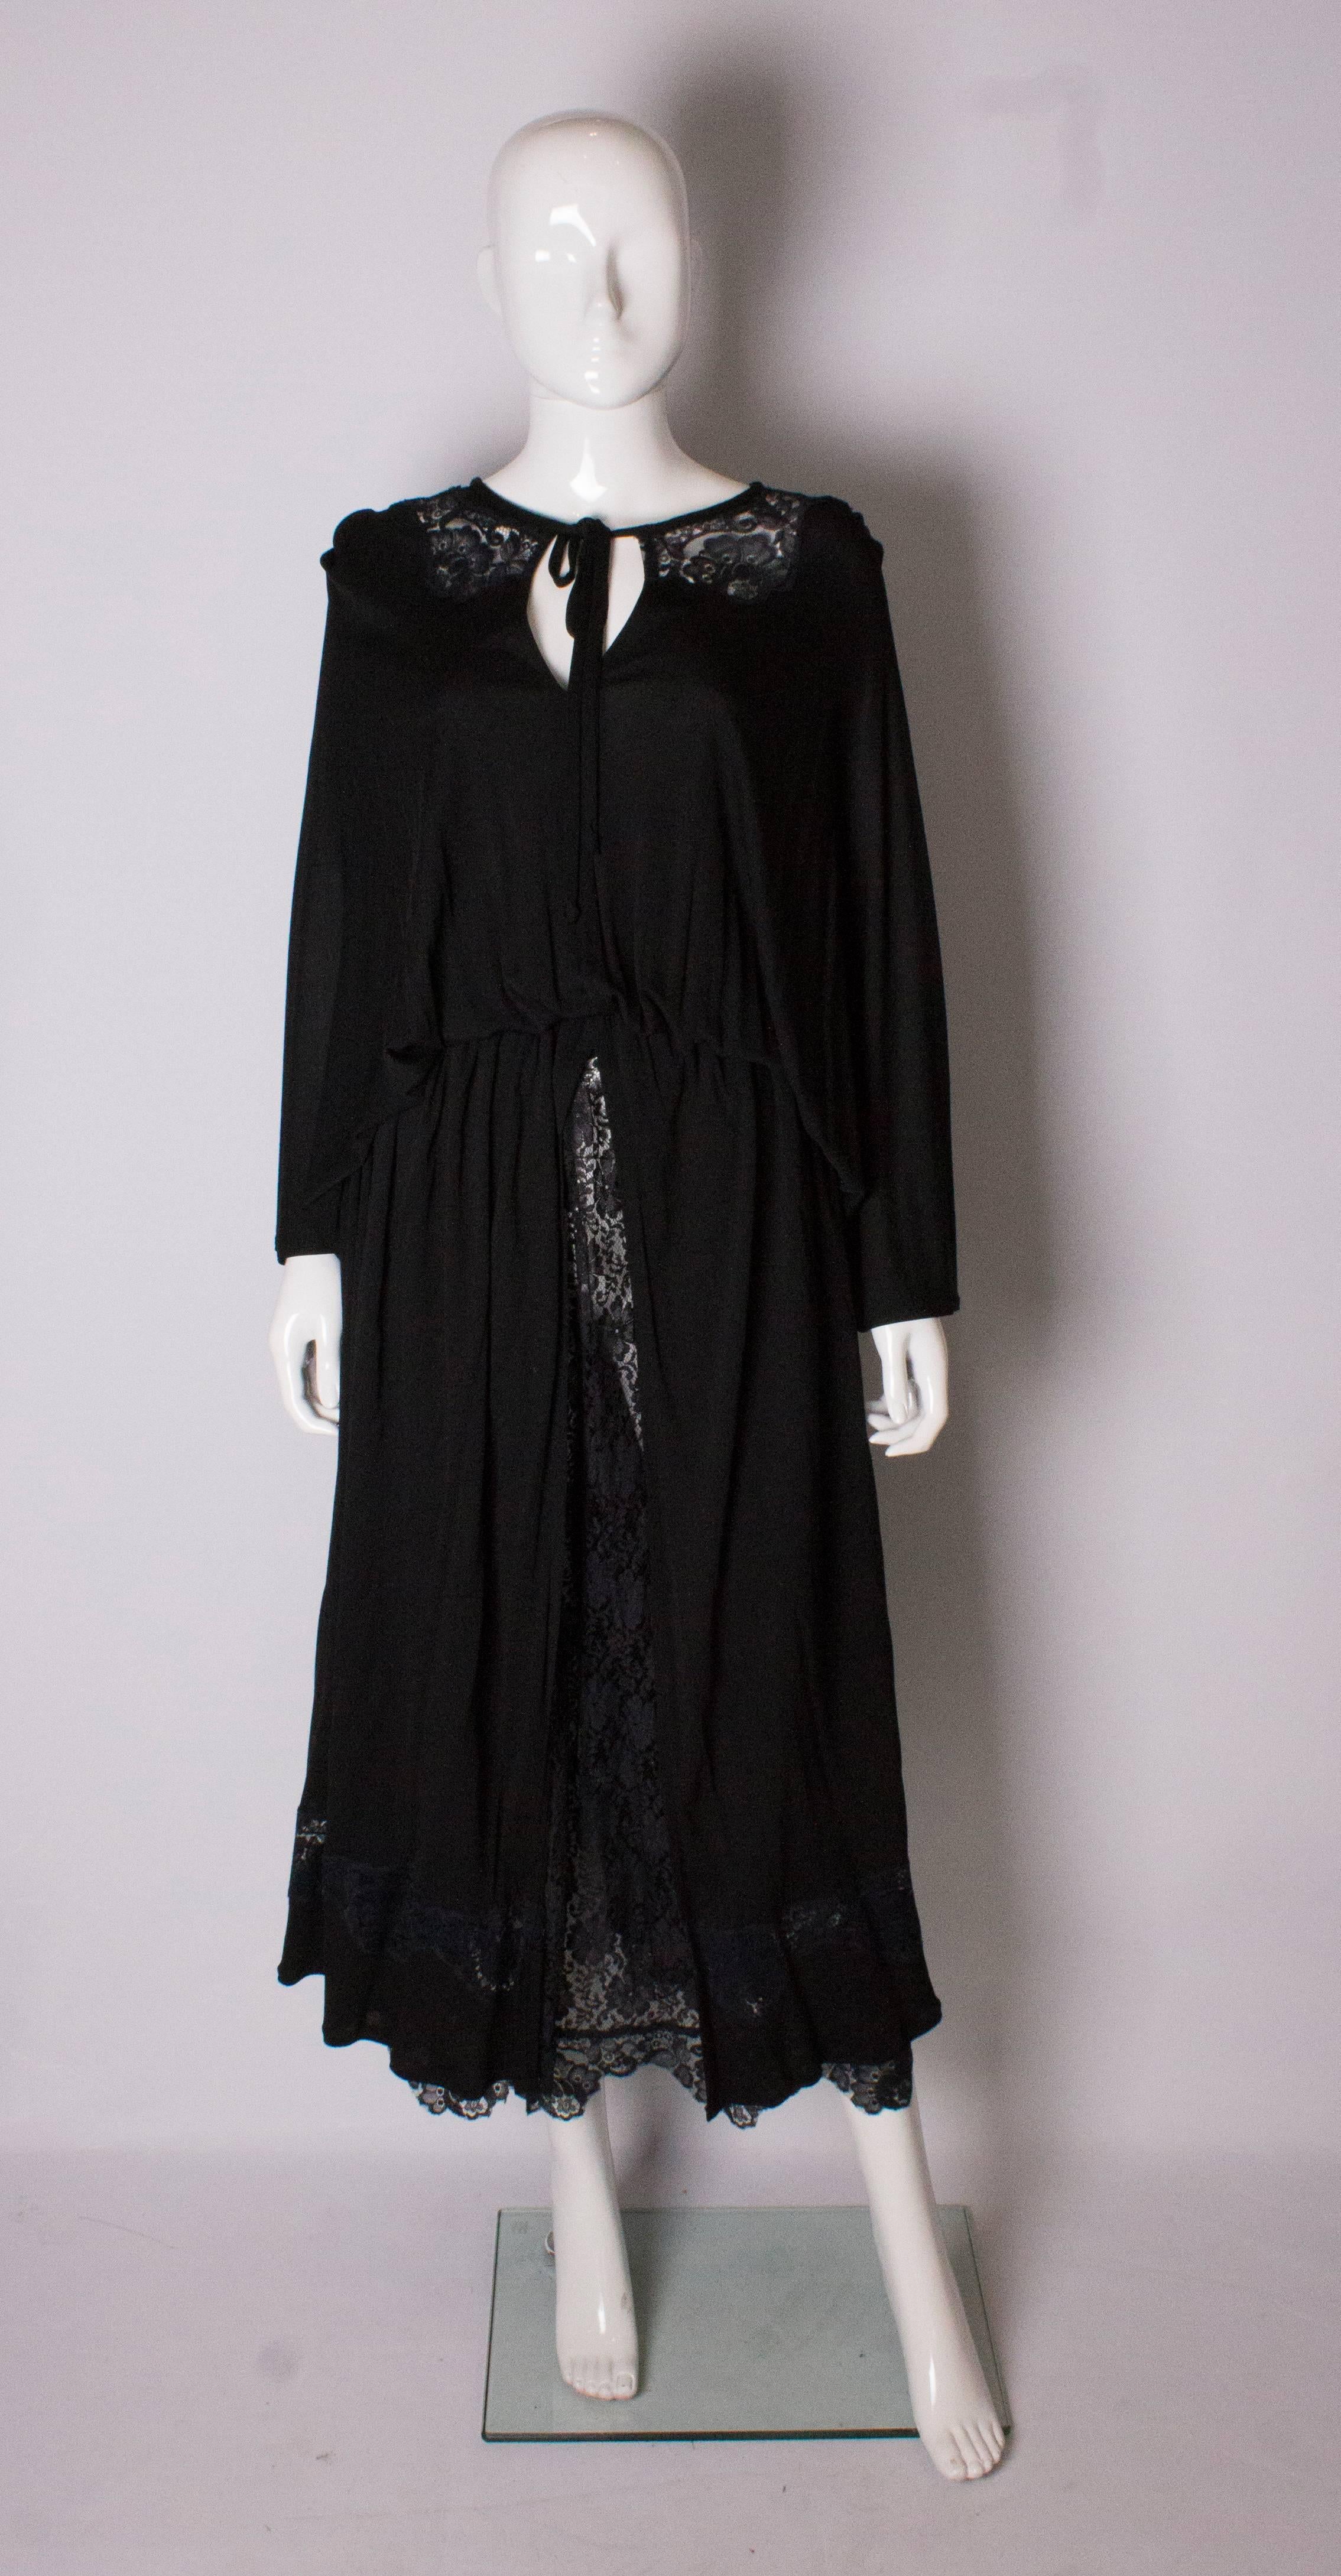 An evening dress by Quorum. The dress has a lace collar and skirt , with a black split over skirt. There is a row of lace at the hem.